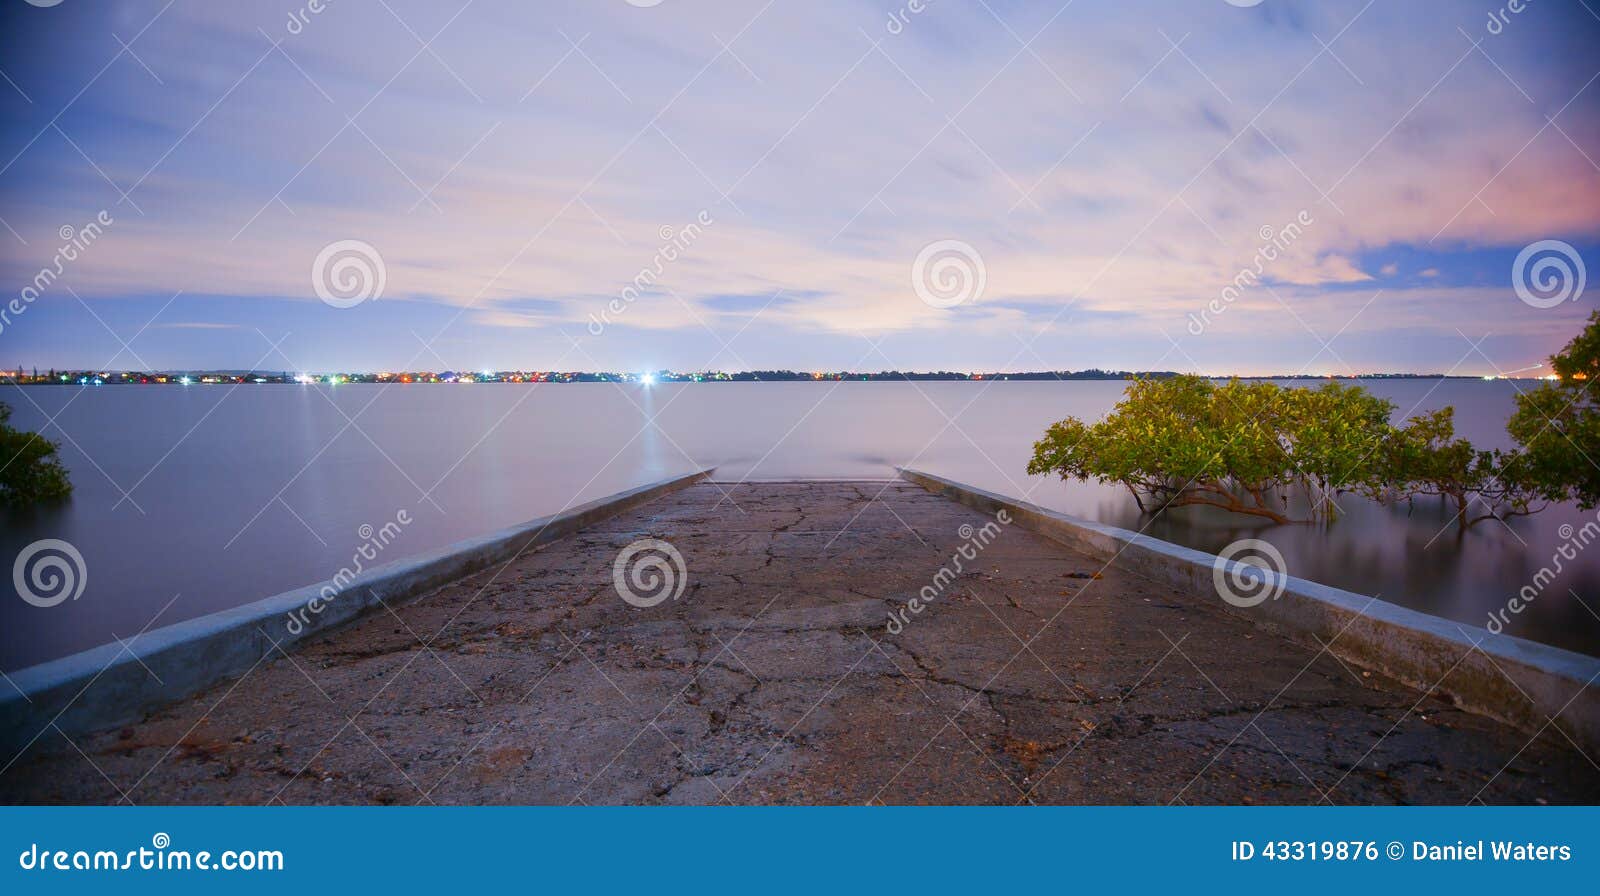 cleveland boat ramp stock photo. image of ramp, color